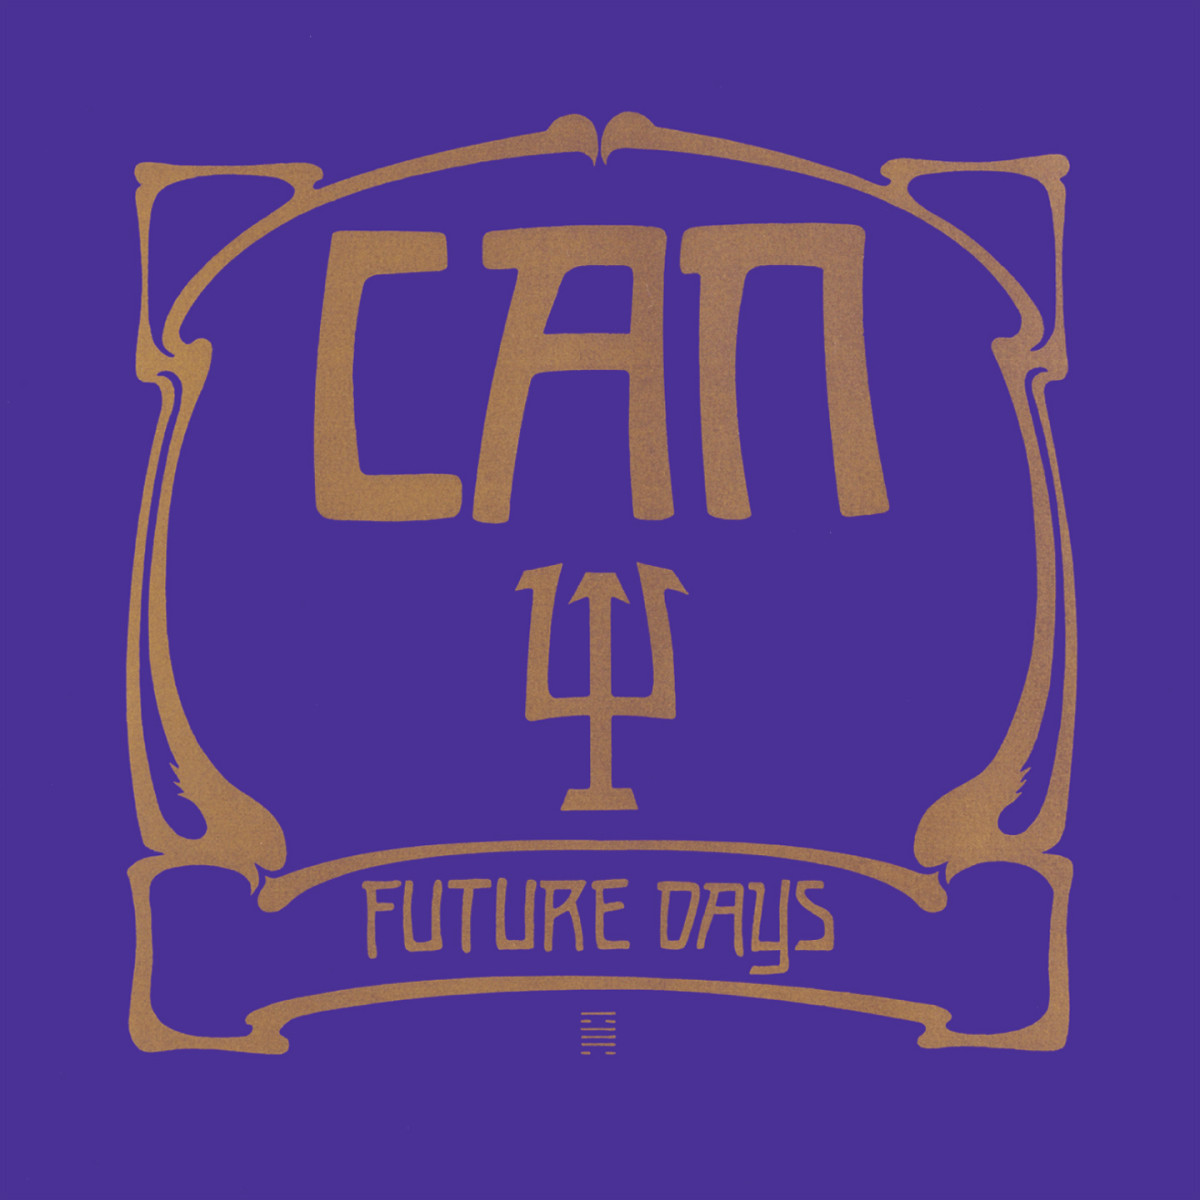 - Future (CD) Can (Remastered) - Days